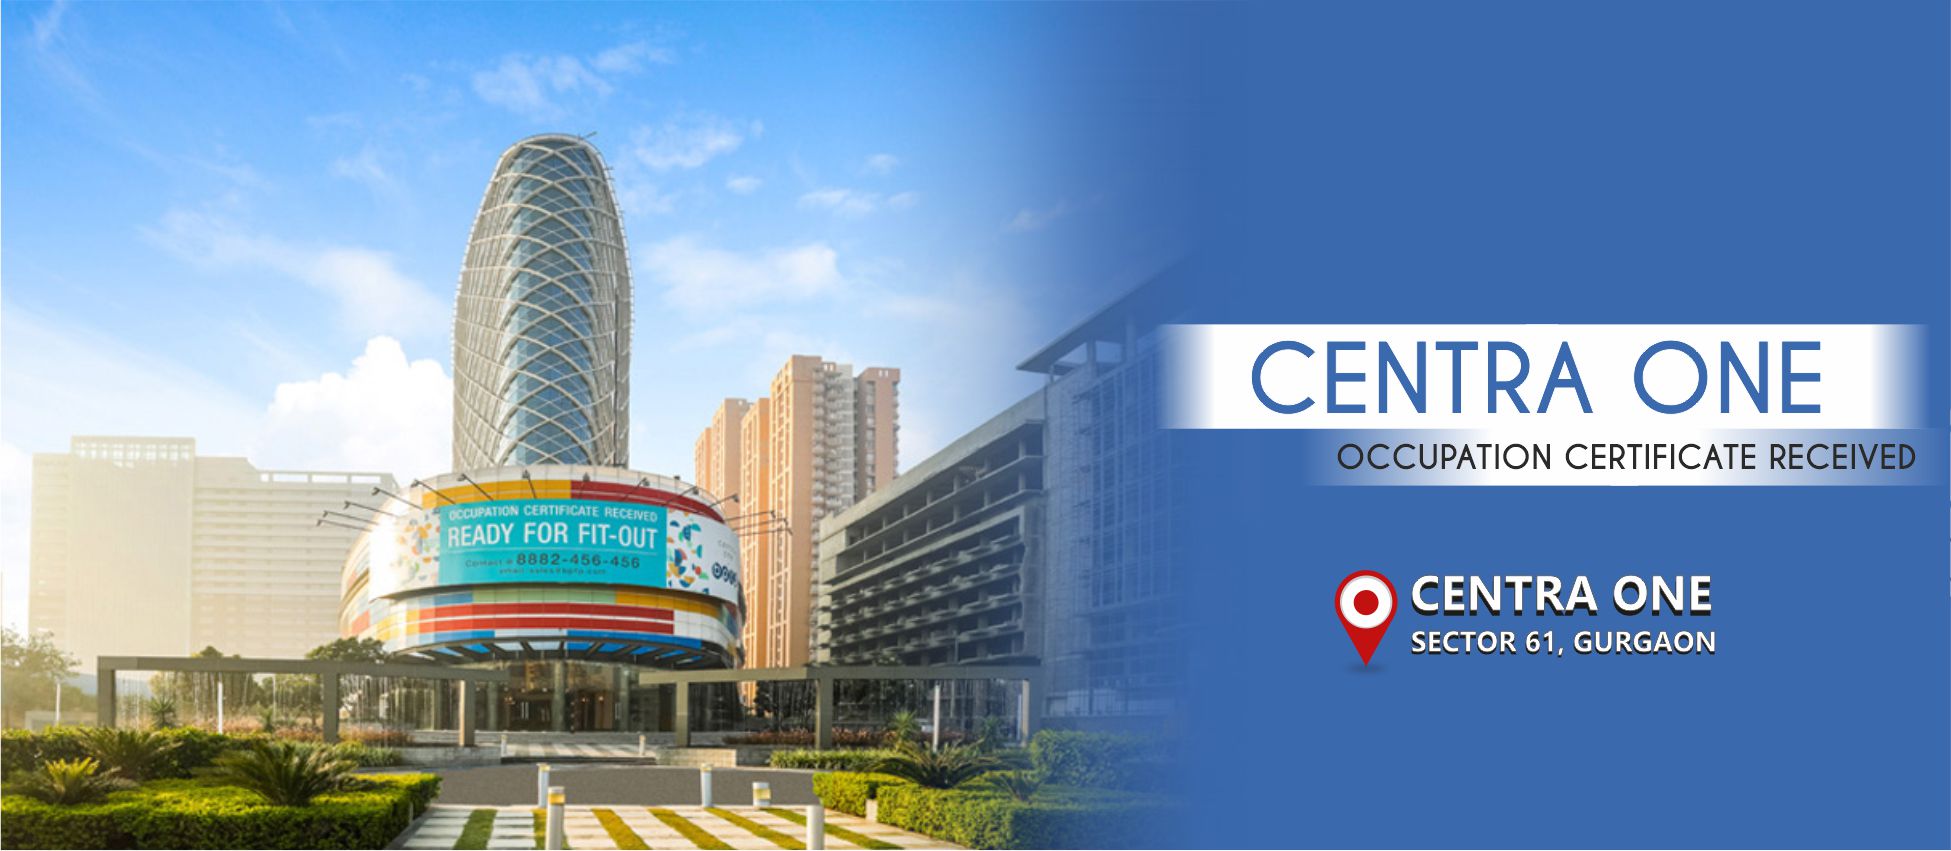 BPTP Centra One in Gurgaon